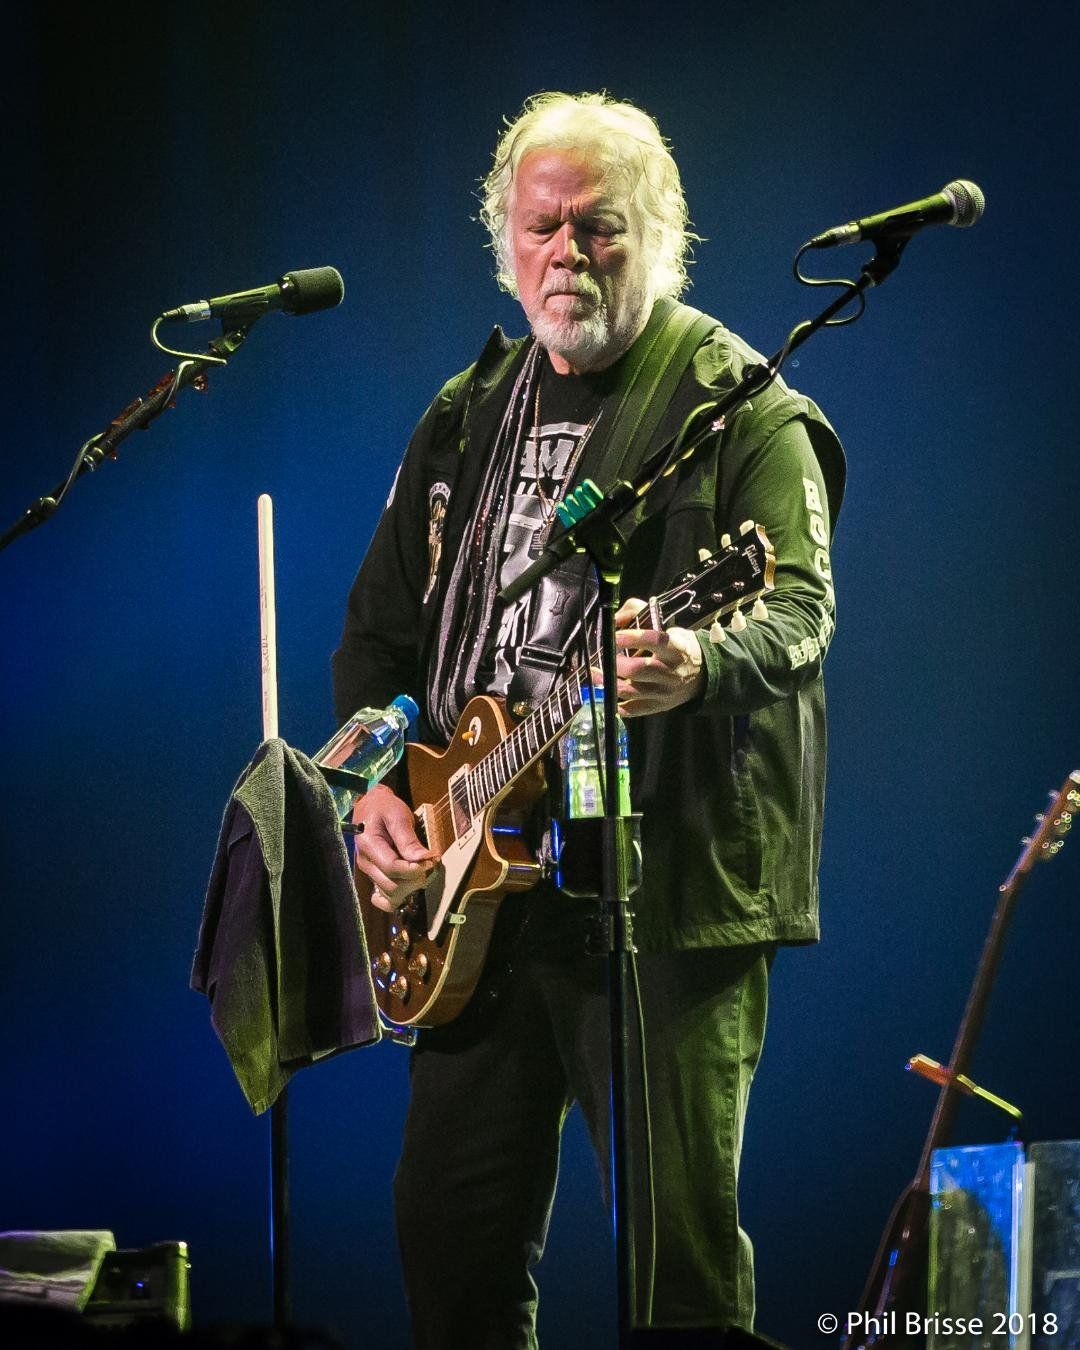 Randy Bachman on stage playing guitar